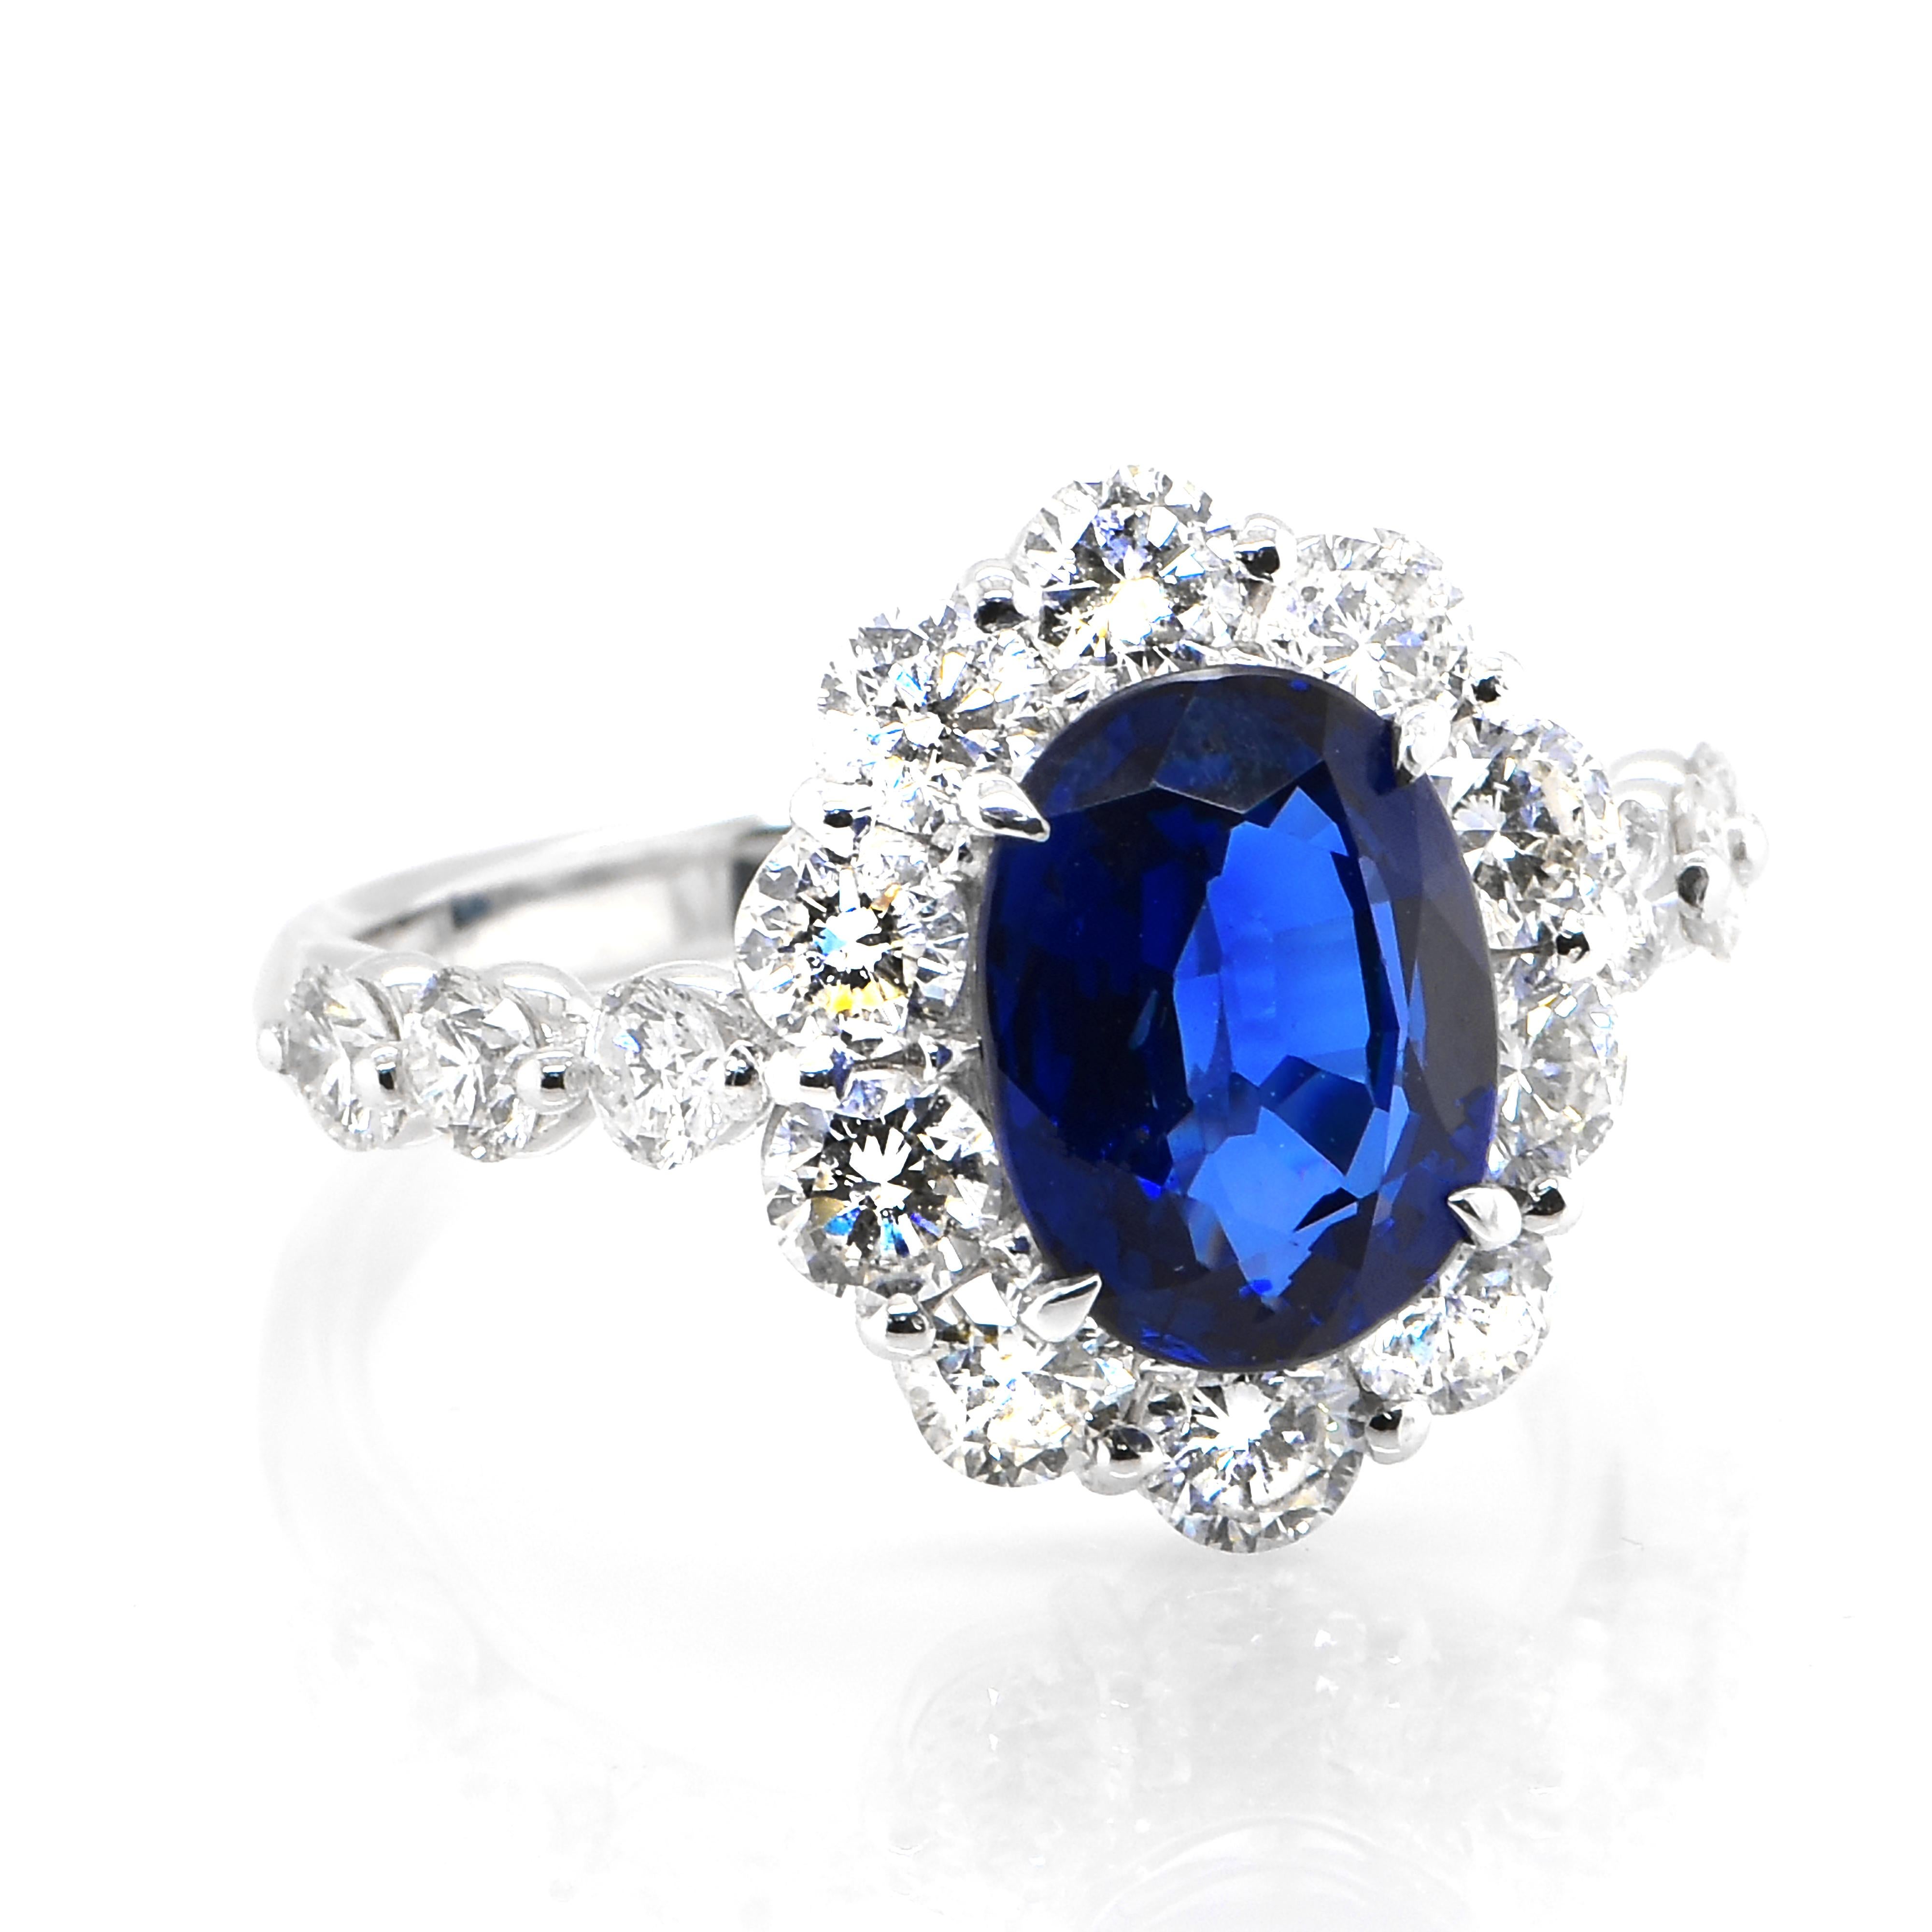 A beautiful ring featuring 2.95 Carat Natural Royal Blue Sapphire and 1.80 Carats Diamond Accents set in Platinum. Sapphires have extraordinary durability - they excel in hardness as well as toughness and durability making them very popular in